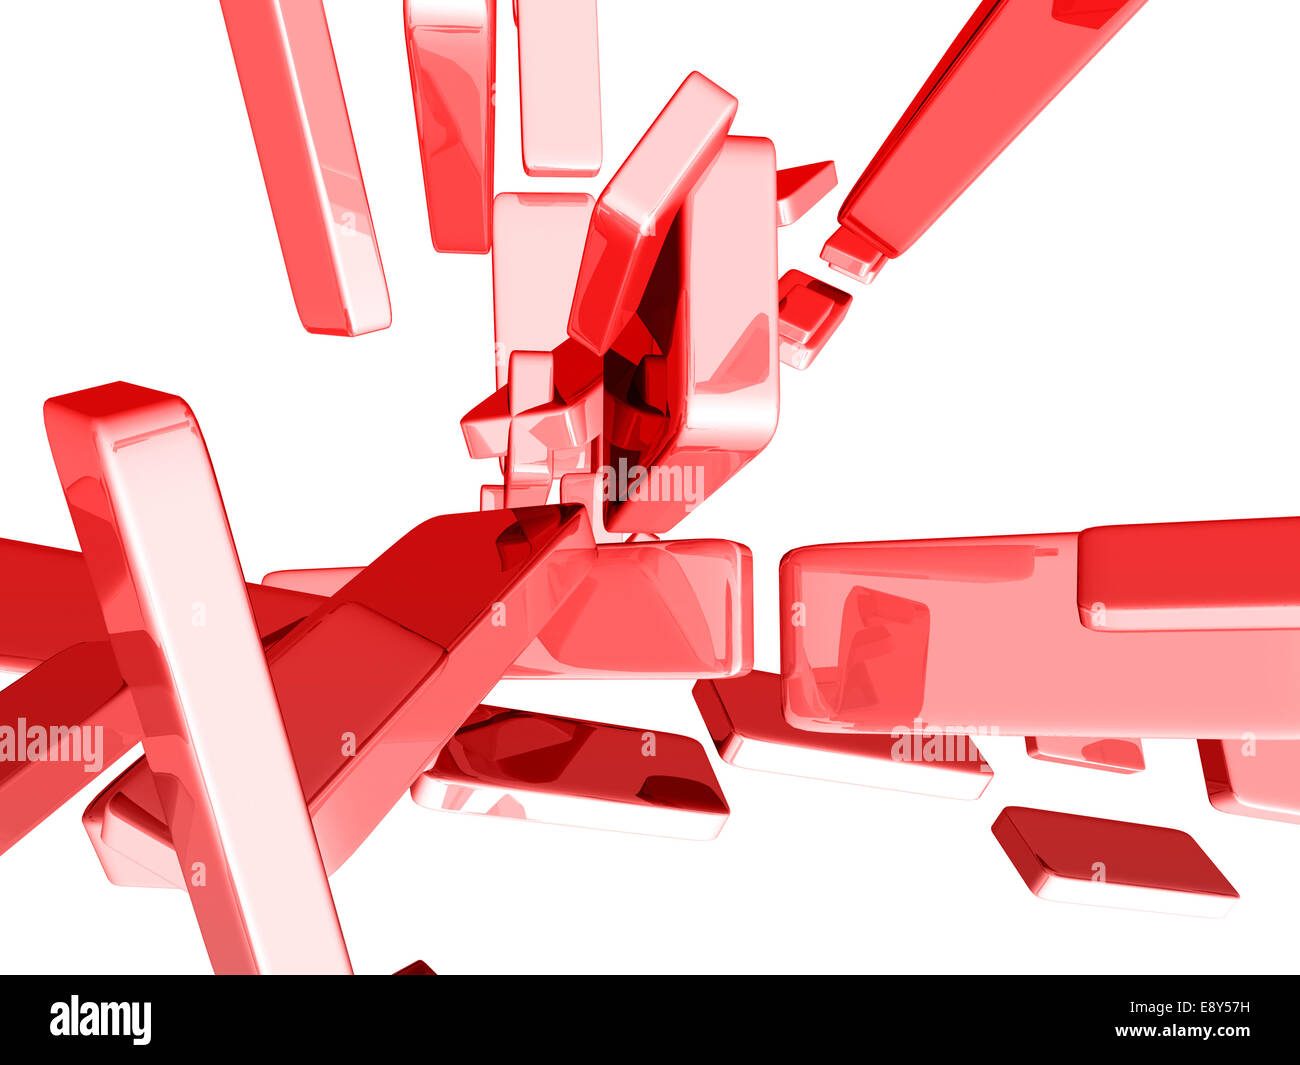 Red 3d cubes with glossy light effects Stock Photo